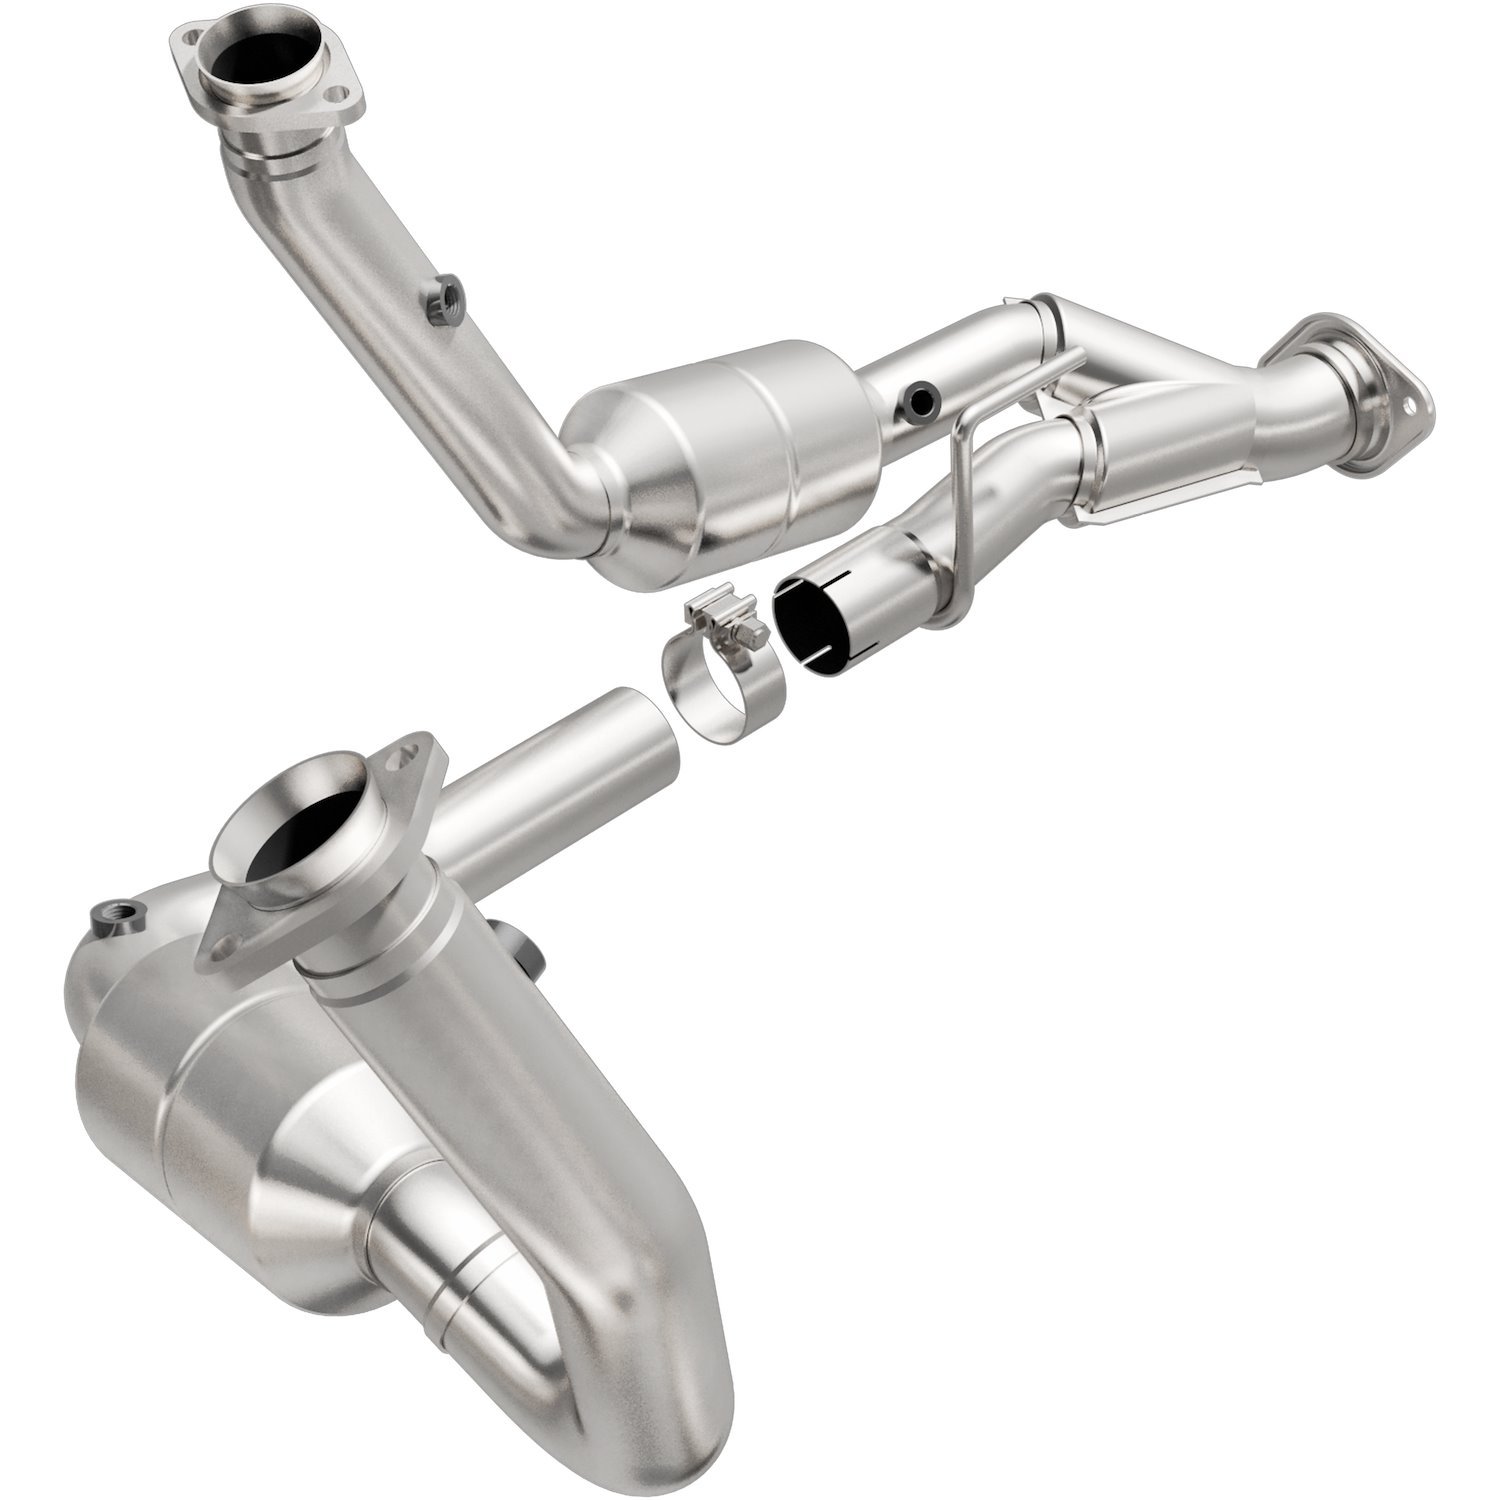 OEM Grade Federal / EPA Compliant Direct-Fit Catalytic Converter 49709